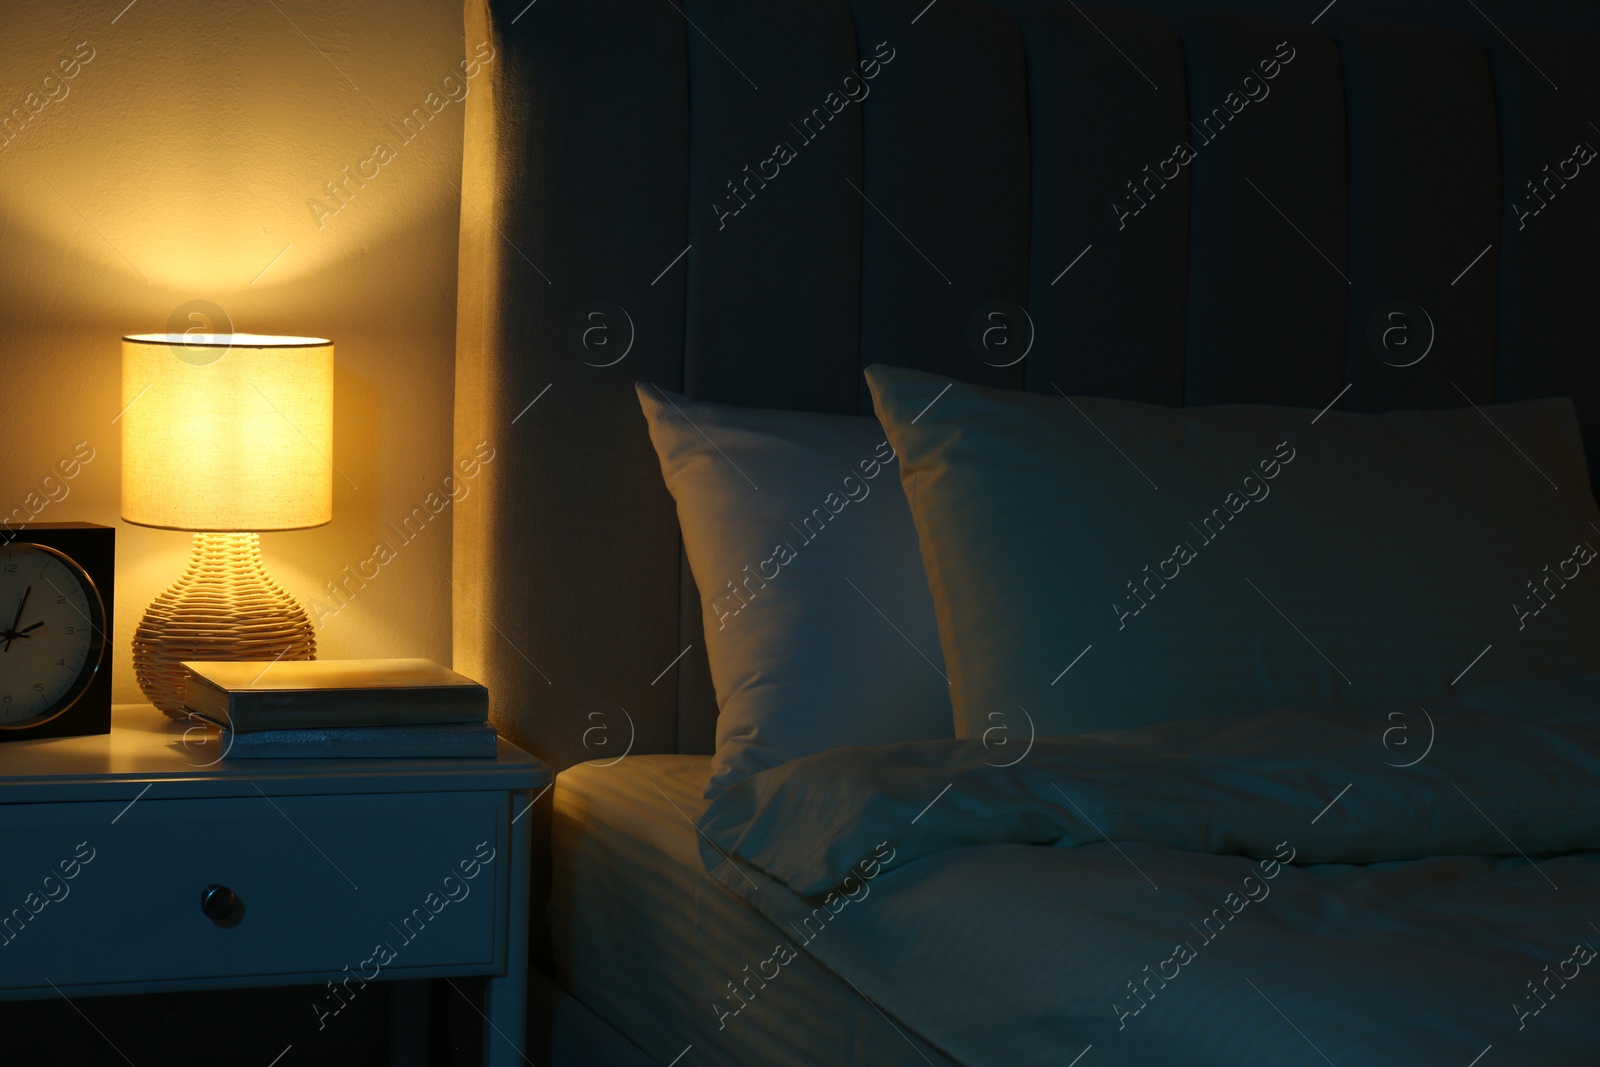 Photo of Nightlight, clock and books on bedside table near bed indoors